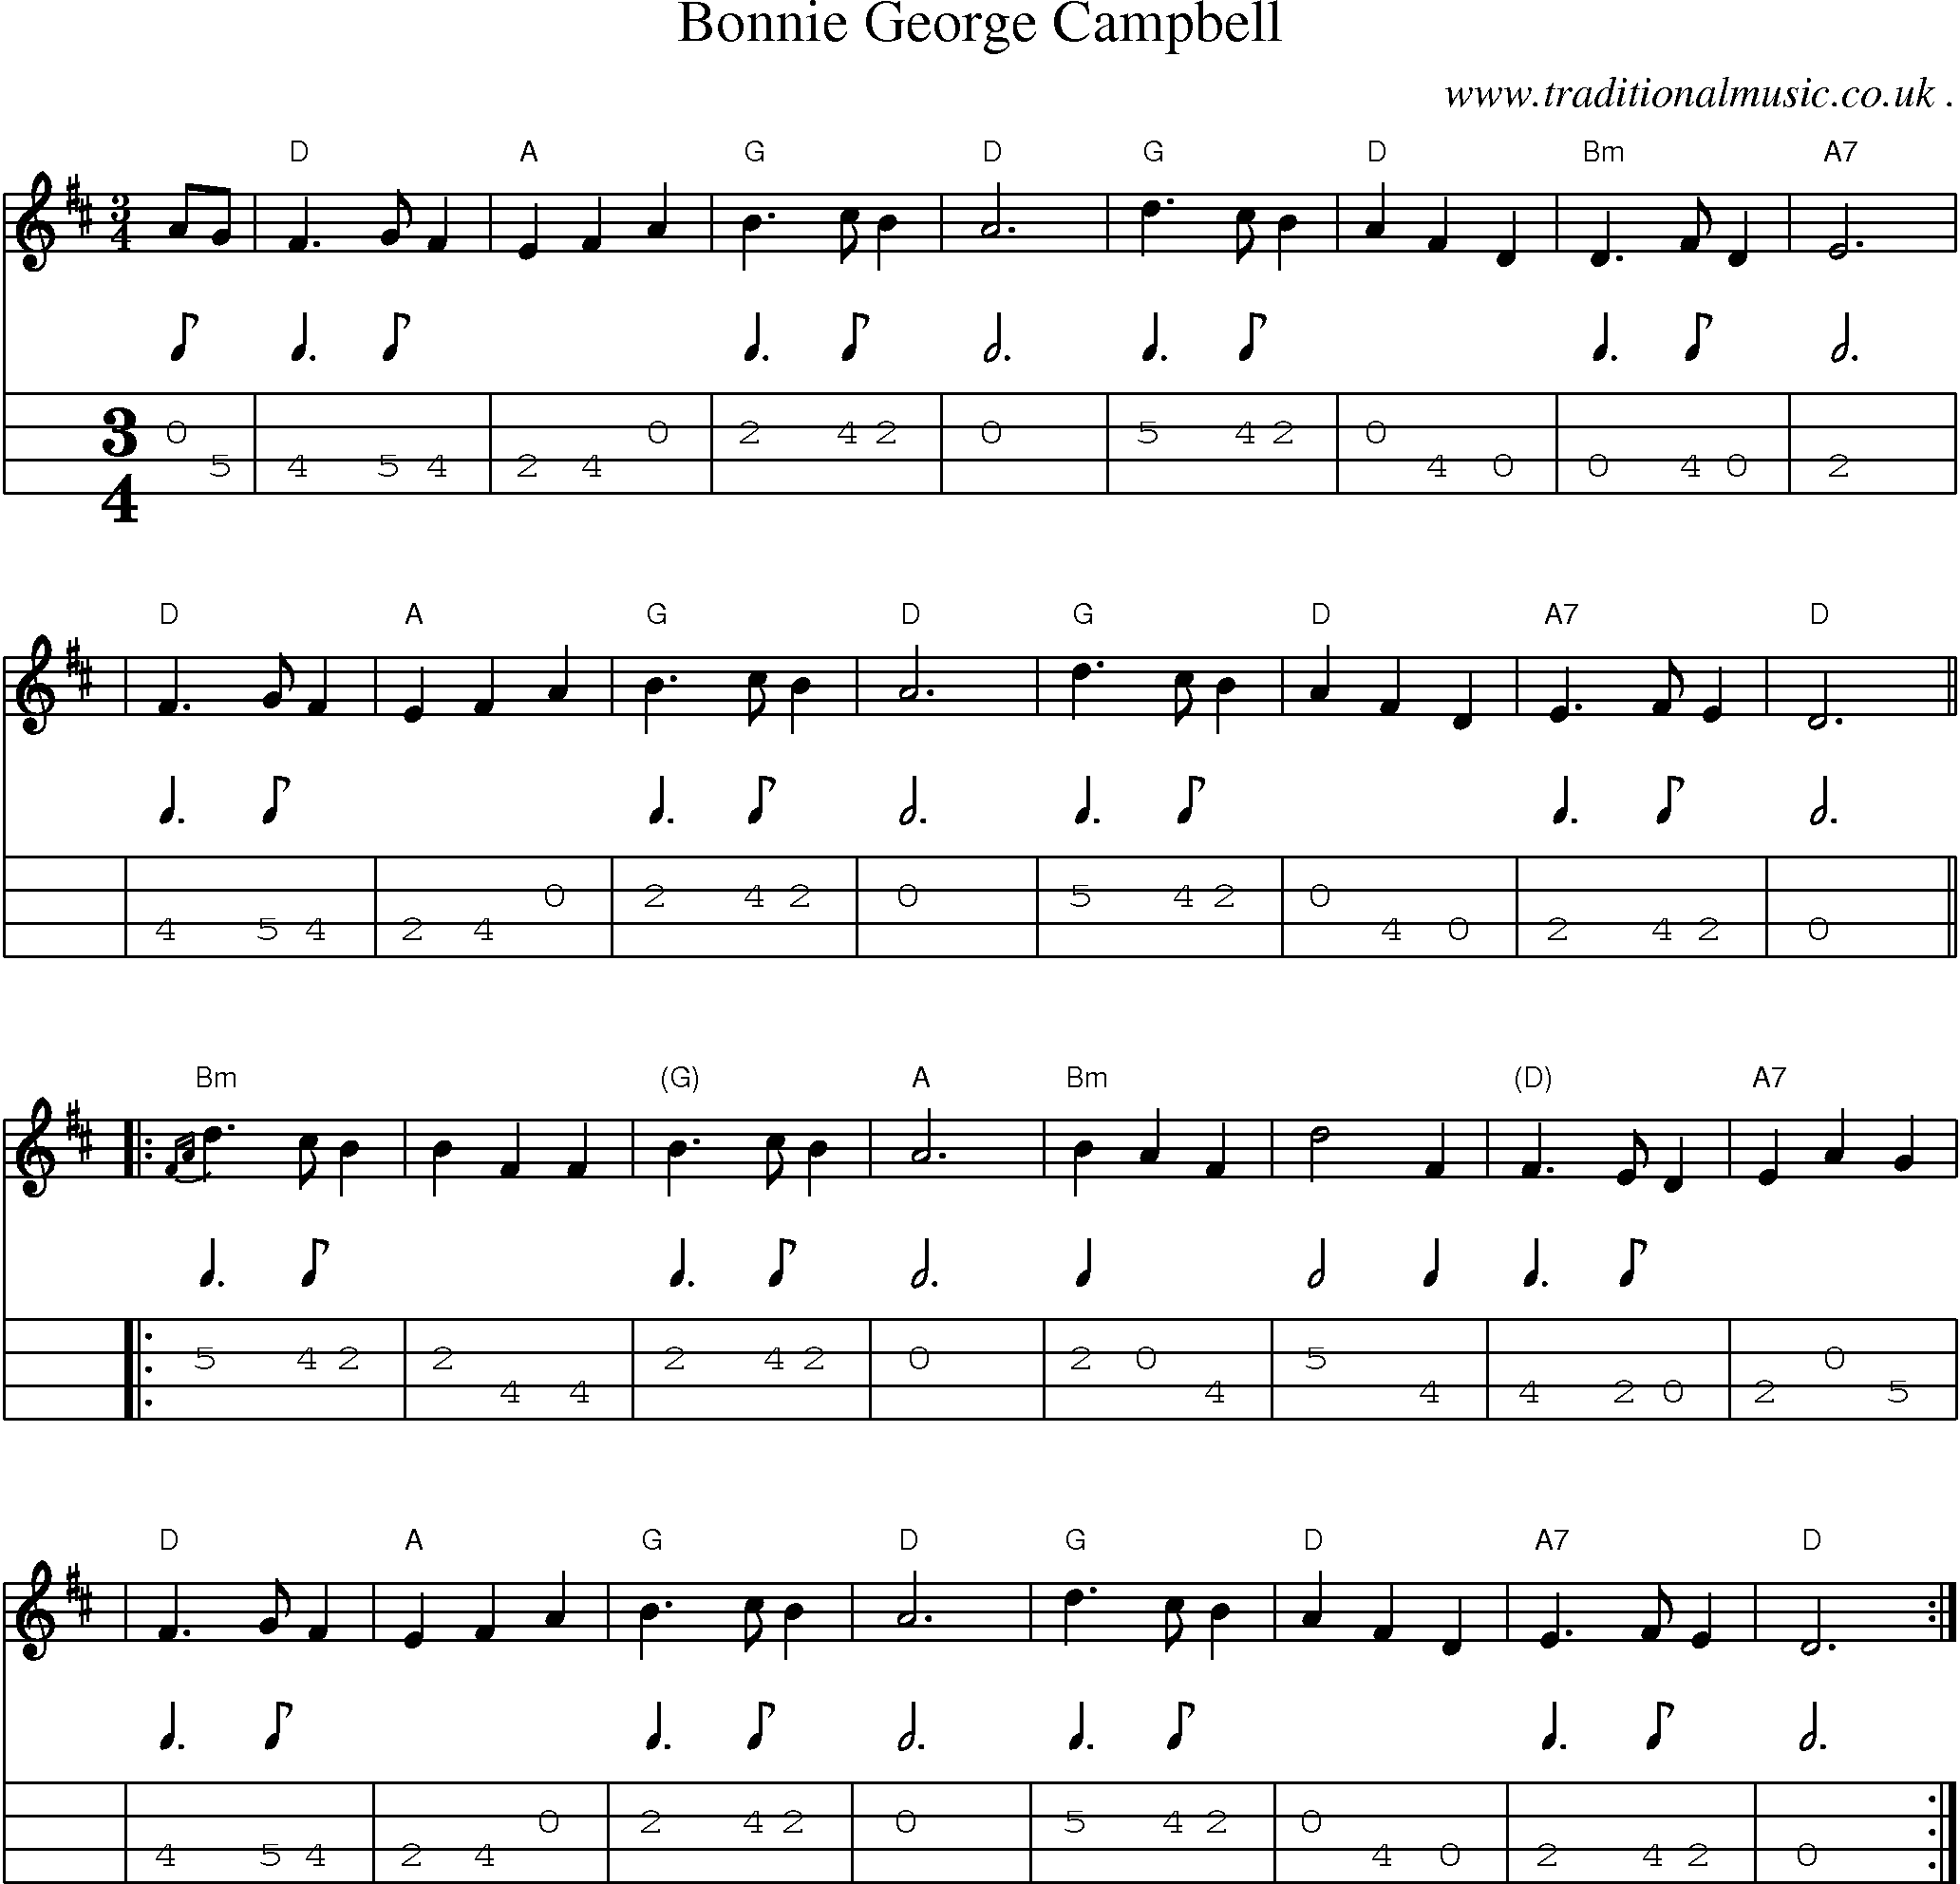 Sheet-music  score, Chords and Mandolin Tabs for Bonnie George Campbell